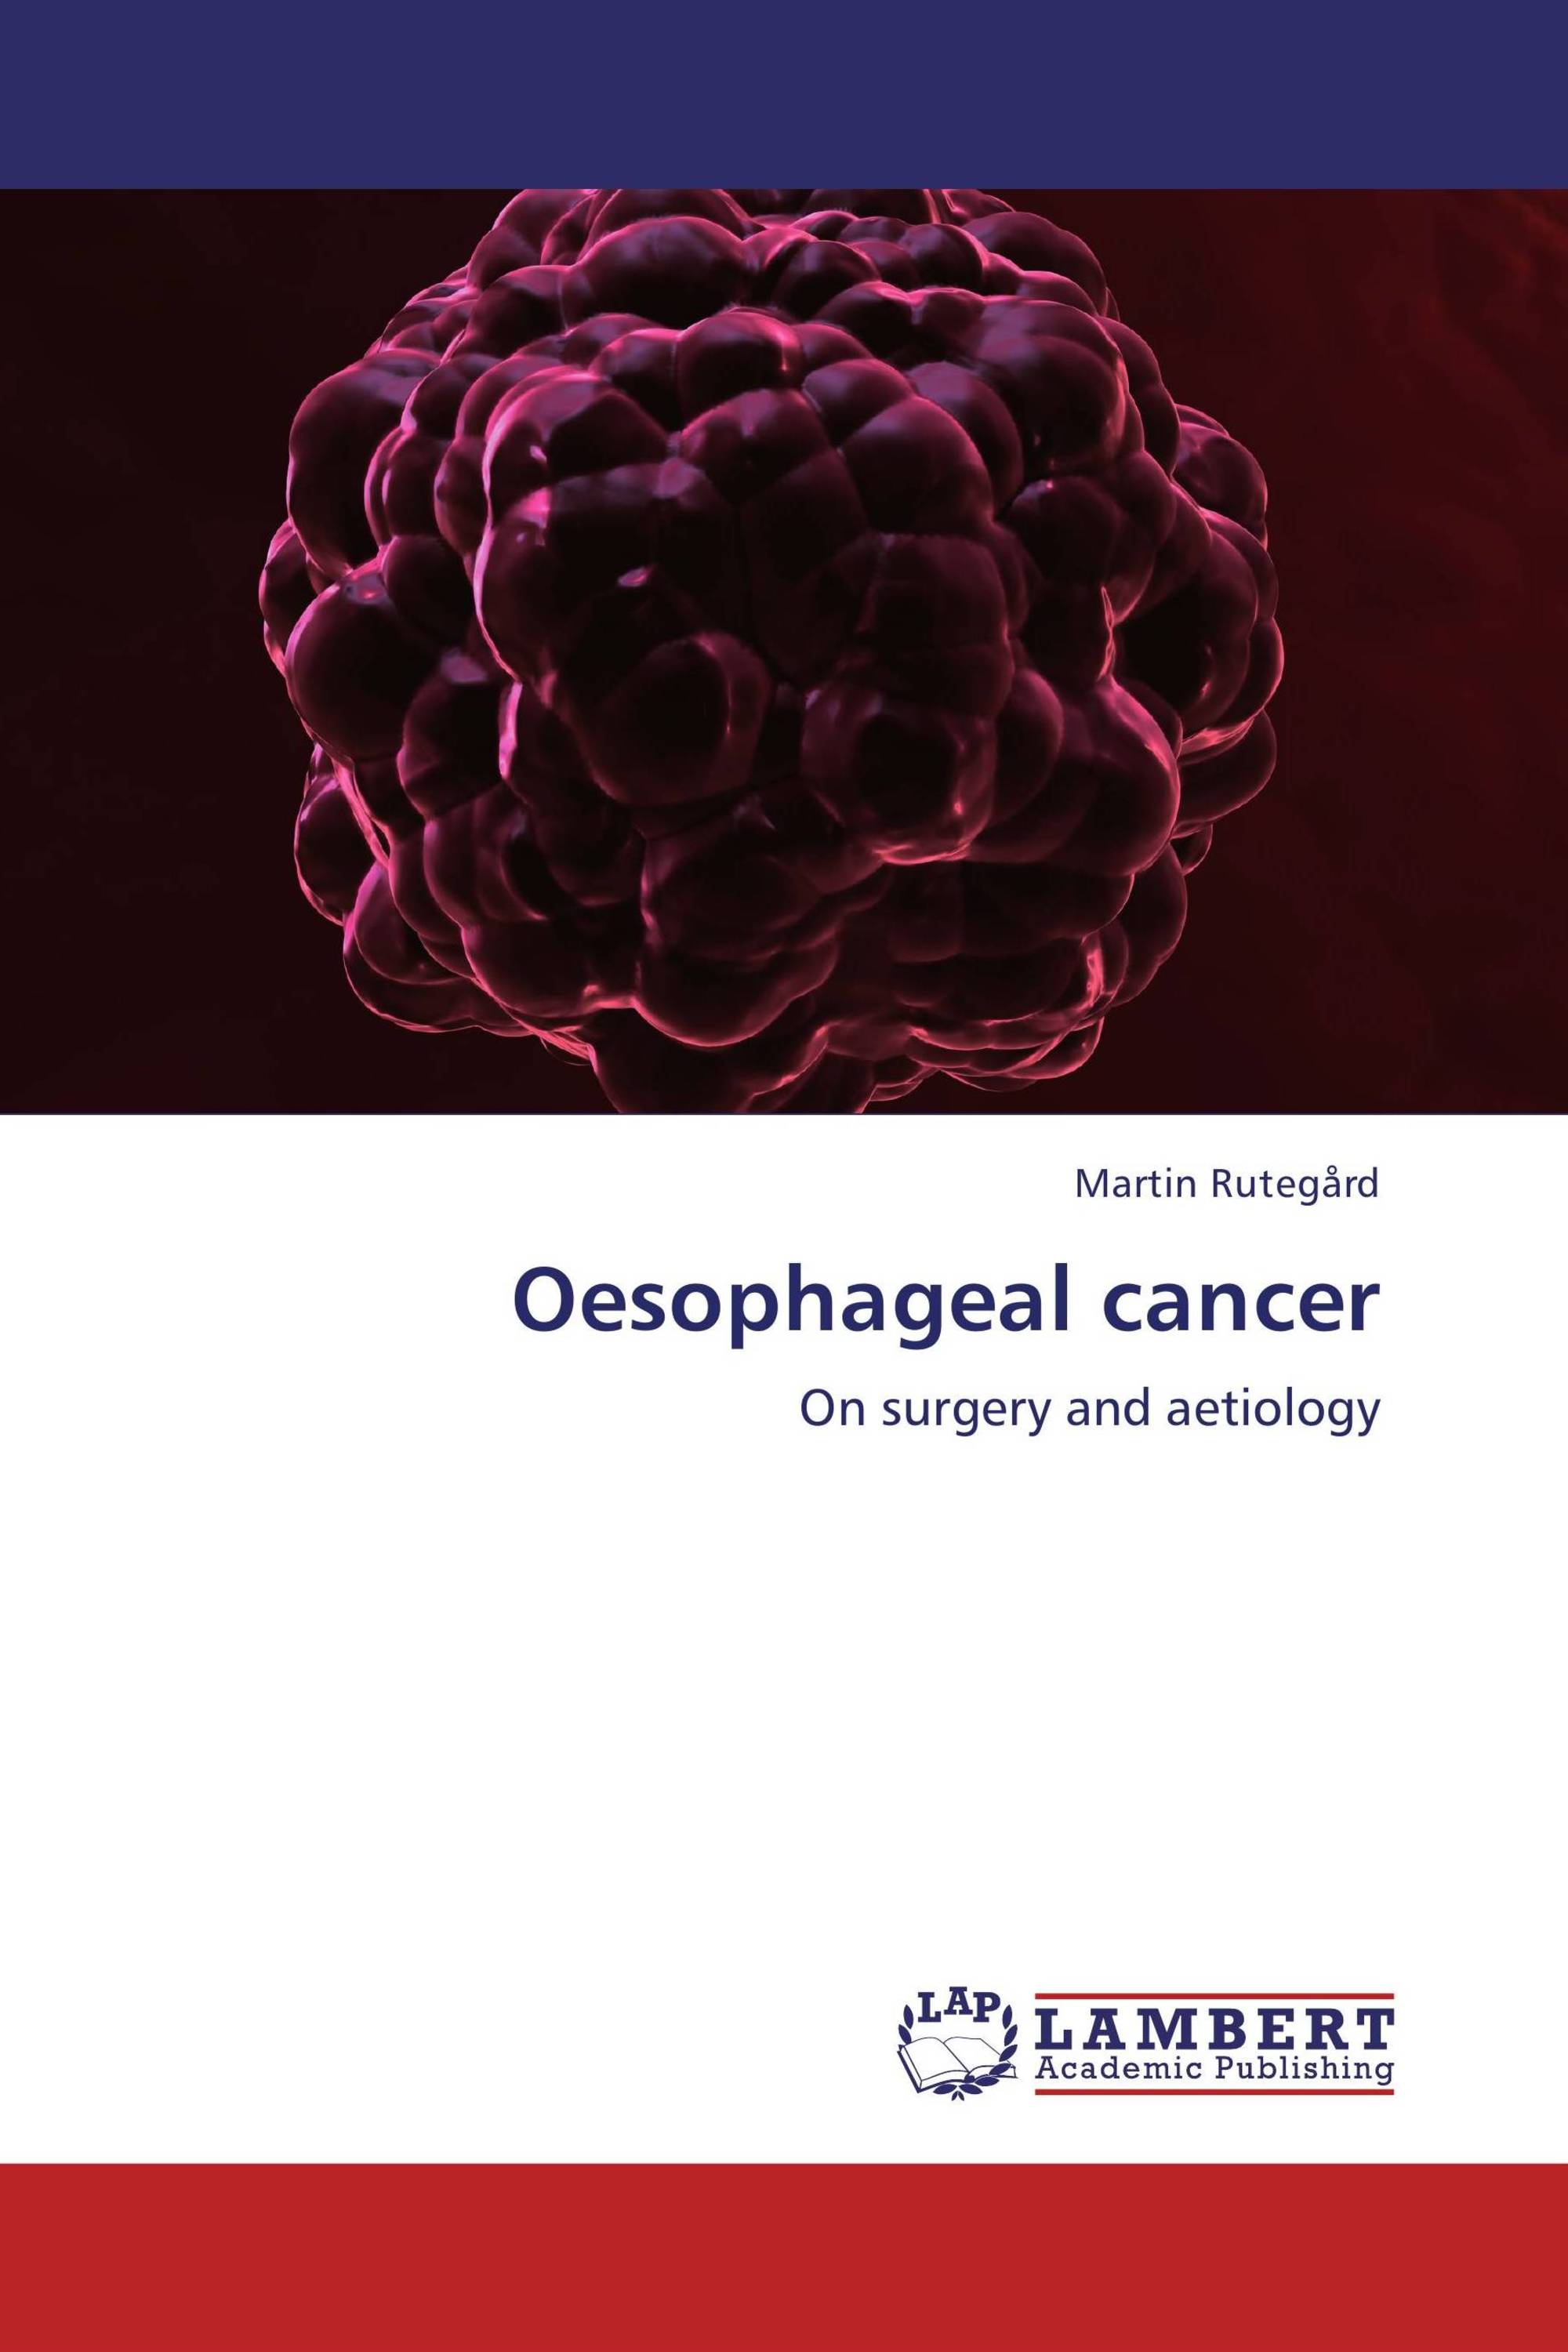 thesis on oesophageal cancer